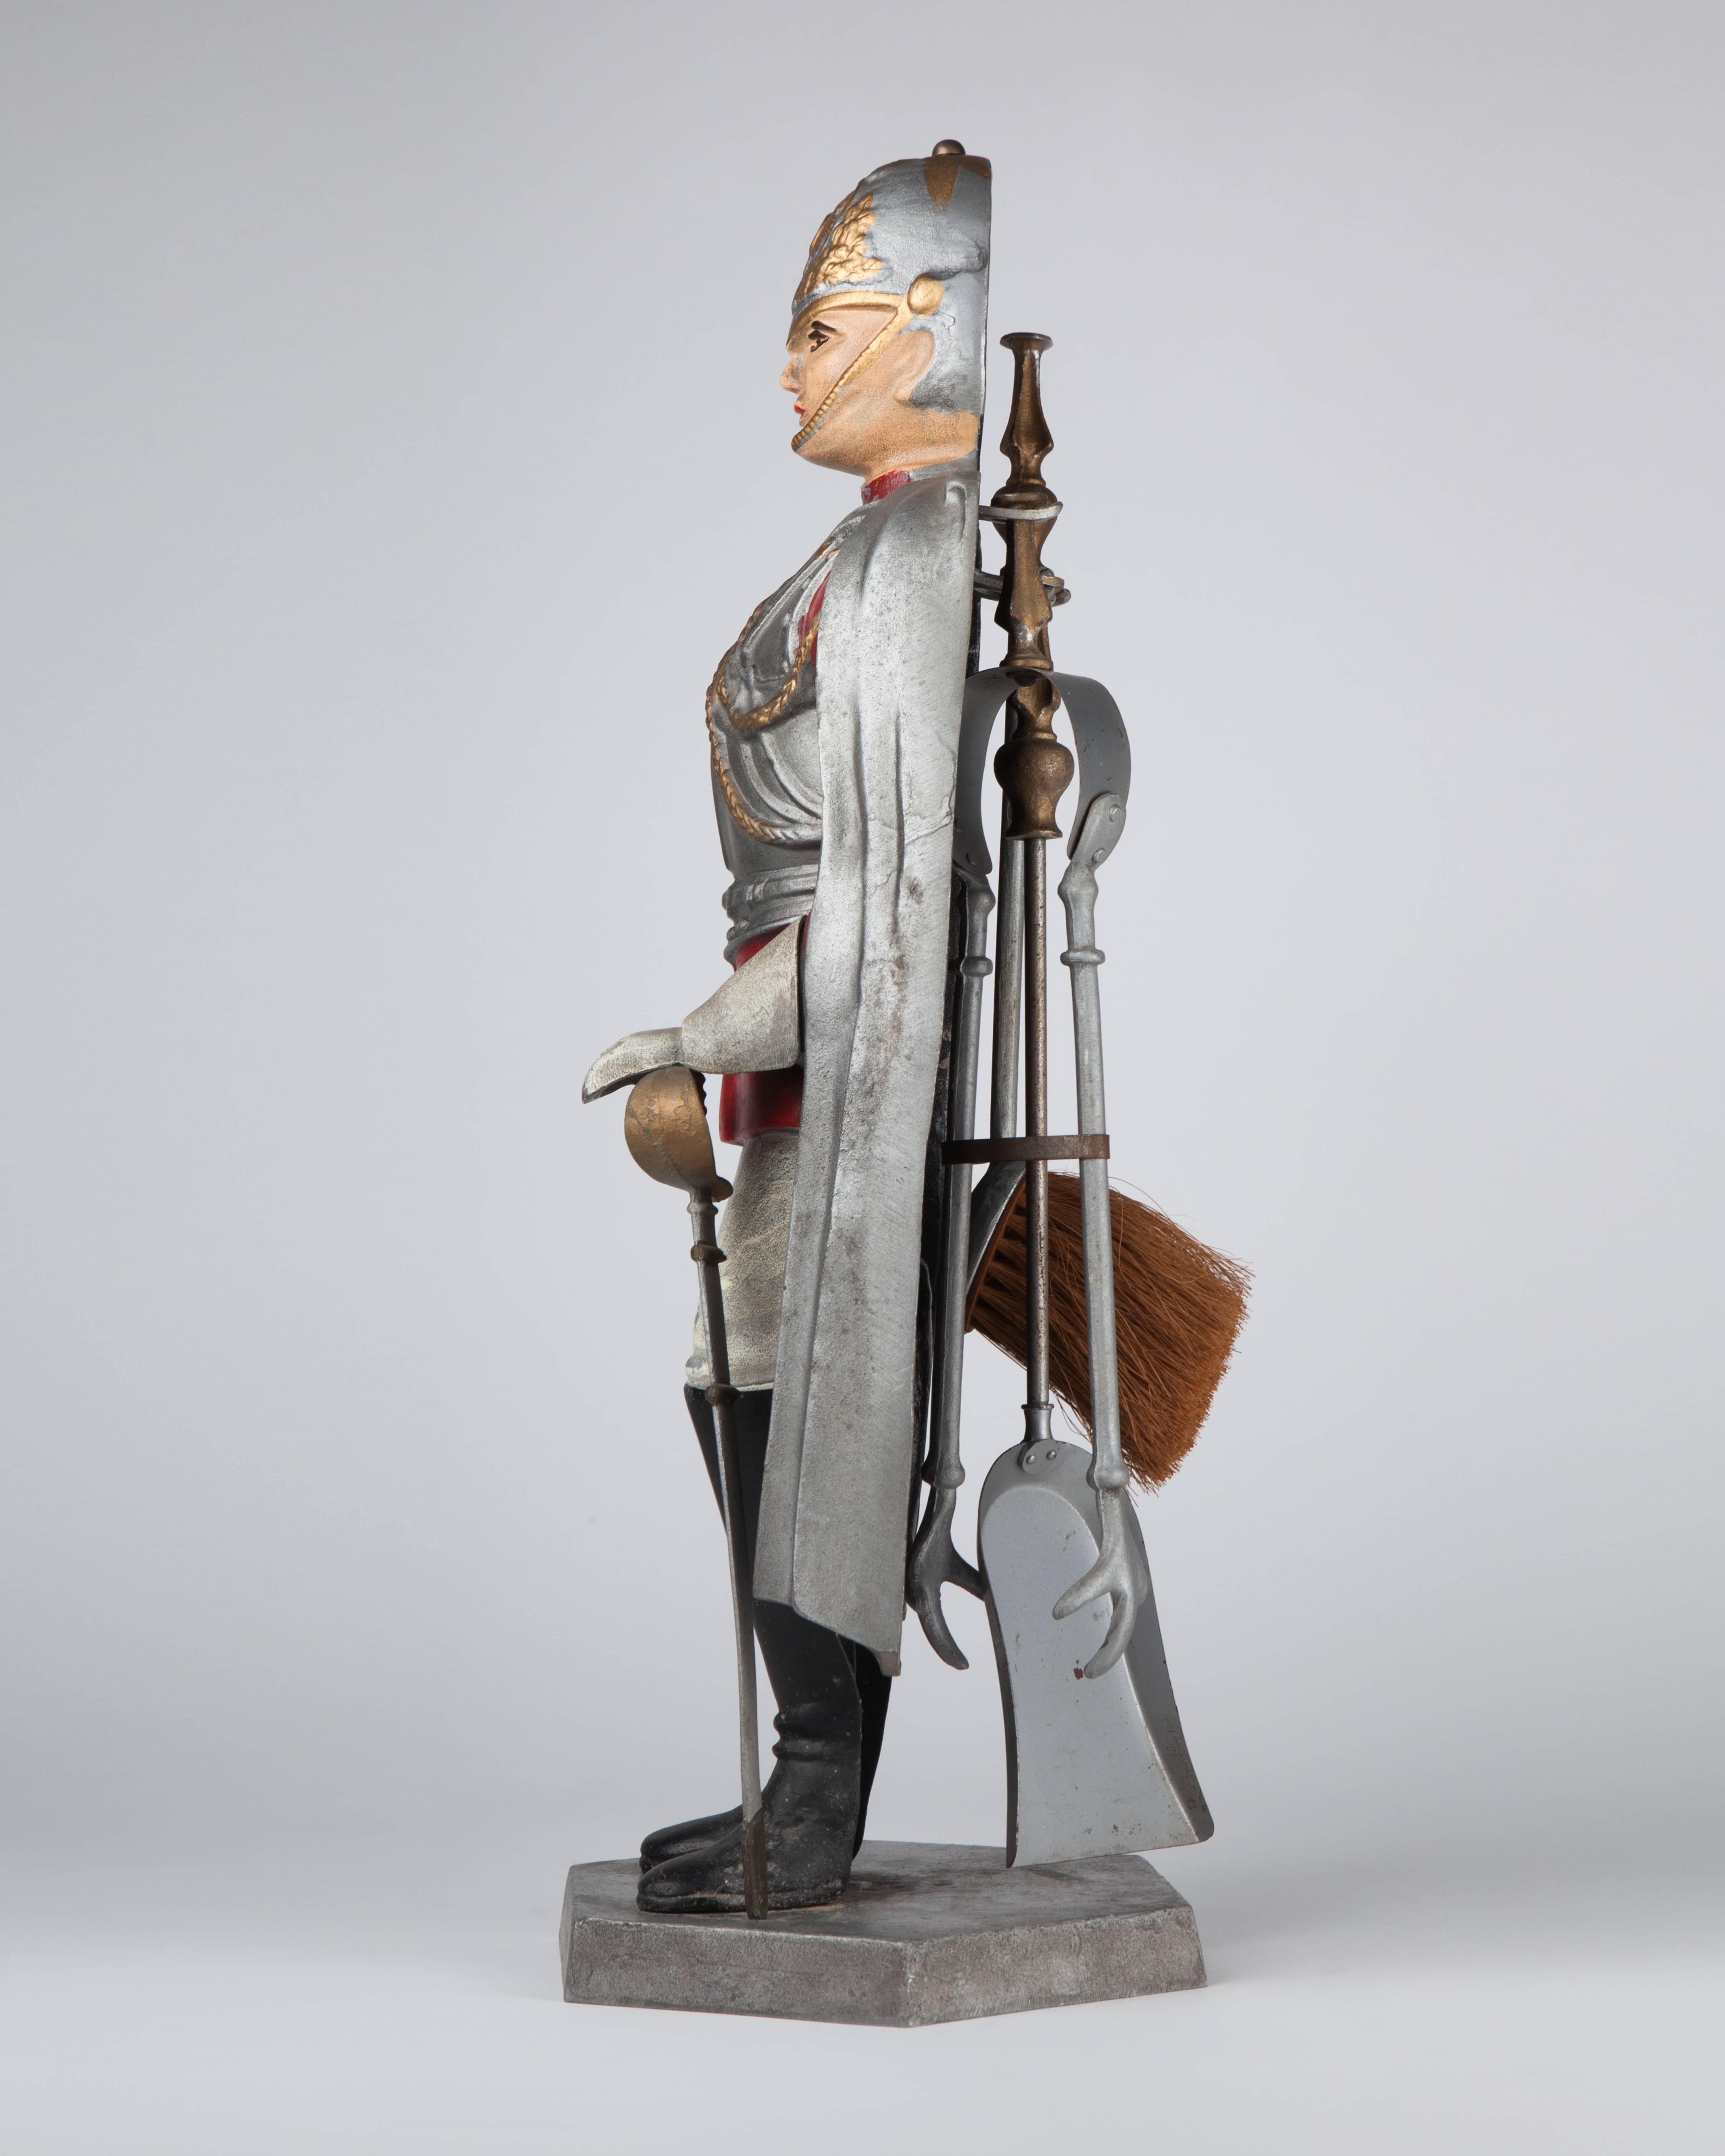 AFP0537
A cast and painted metal statue of a sentry in armor holds a classic tool set of brush, poker and tongs.

Dimensions:
Overall: 25-1/2